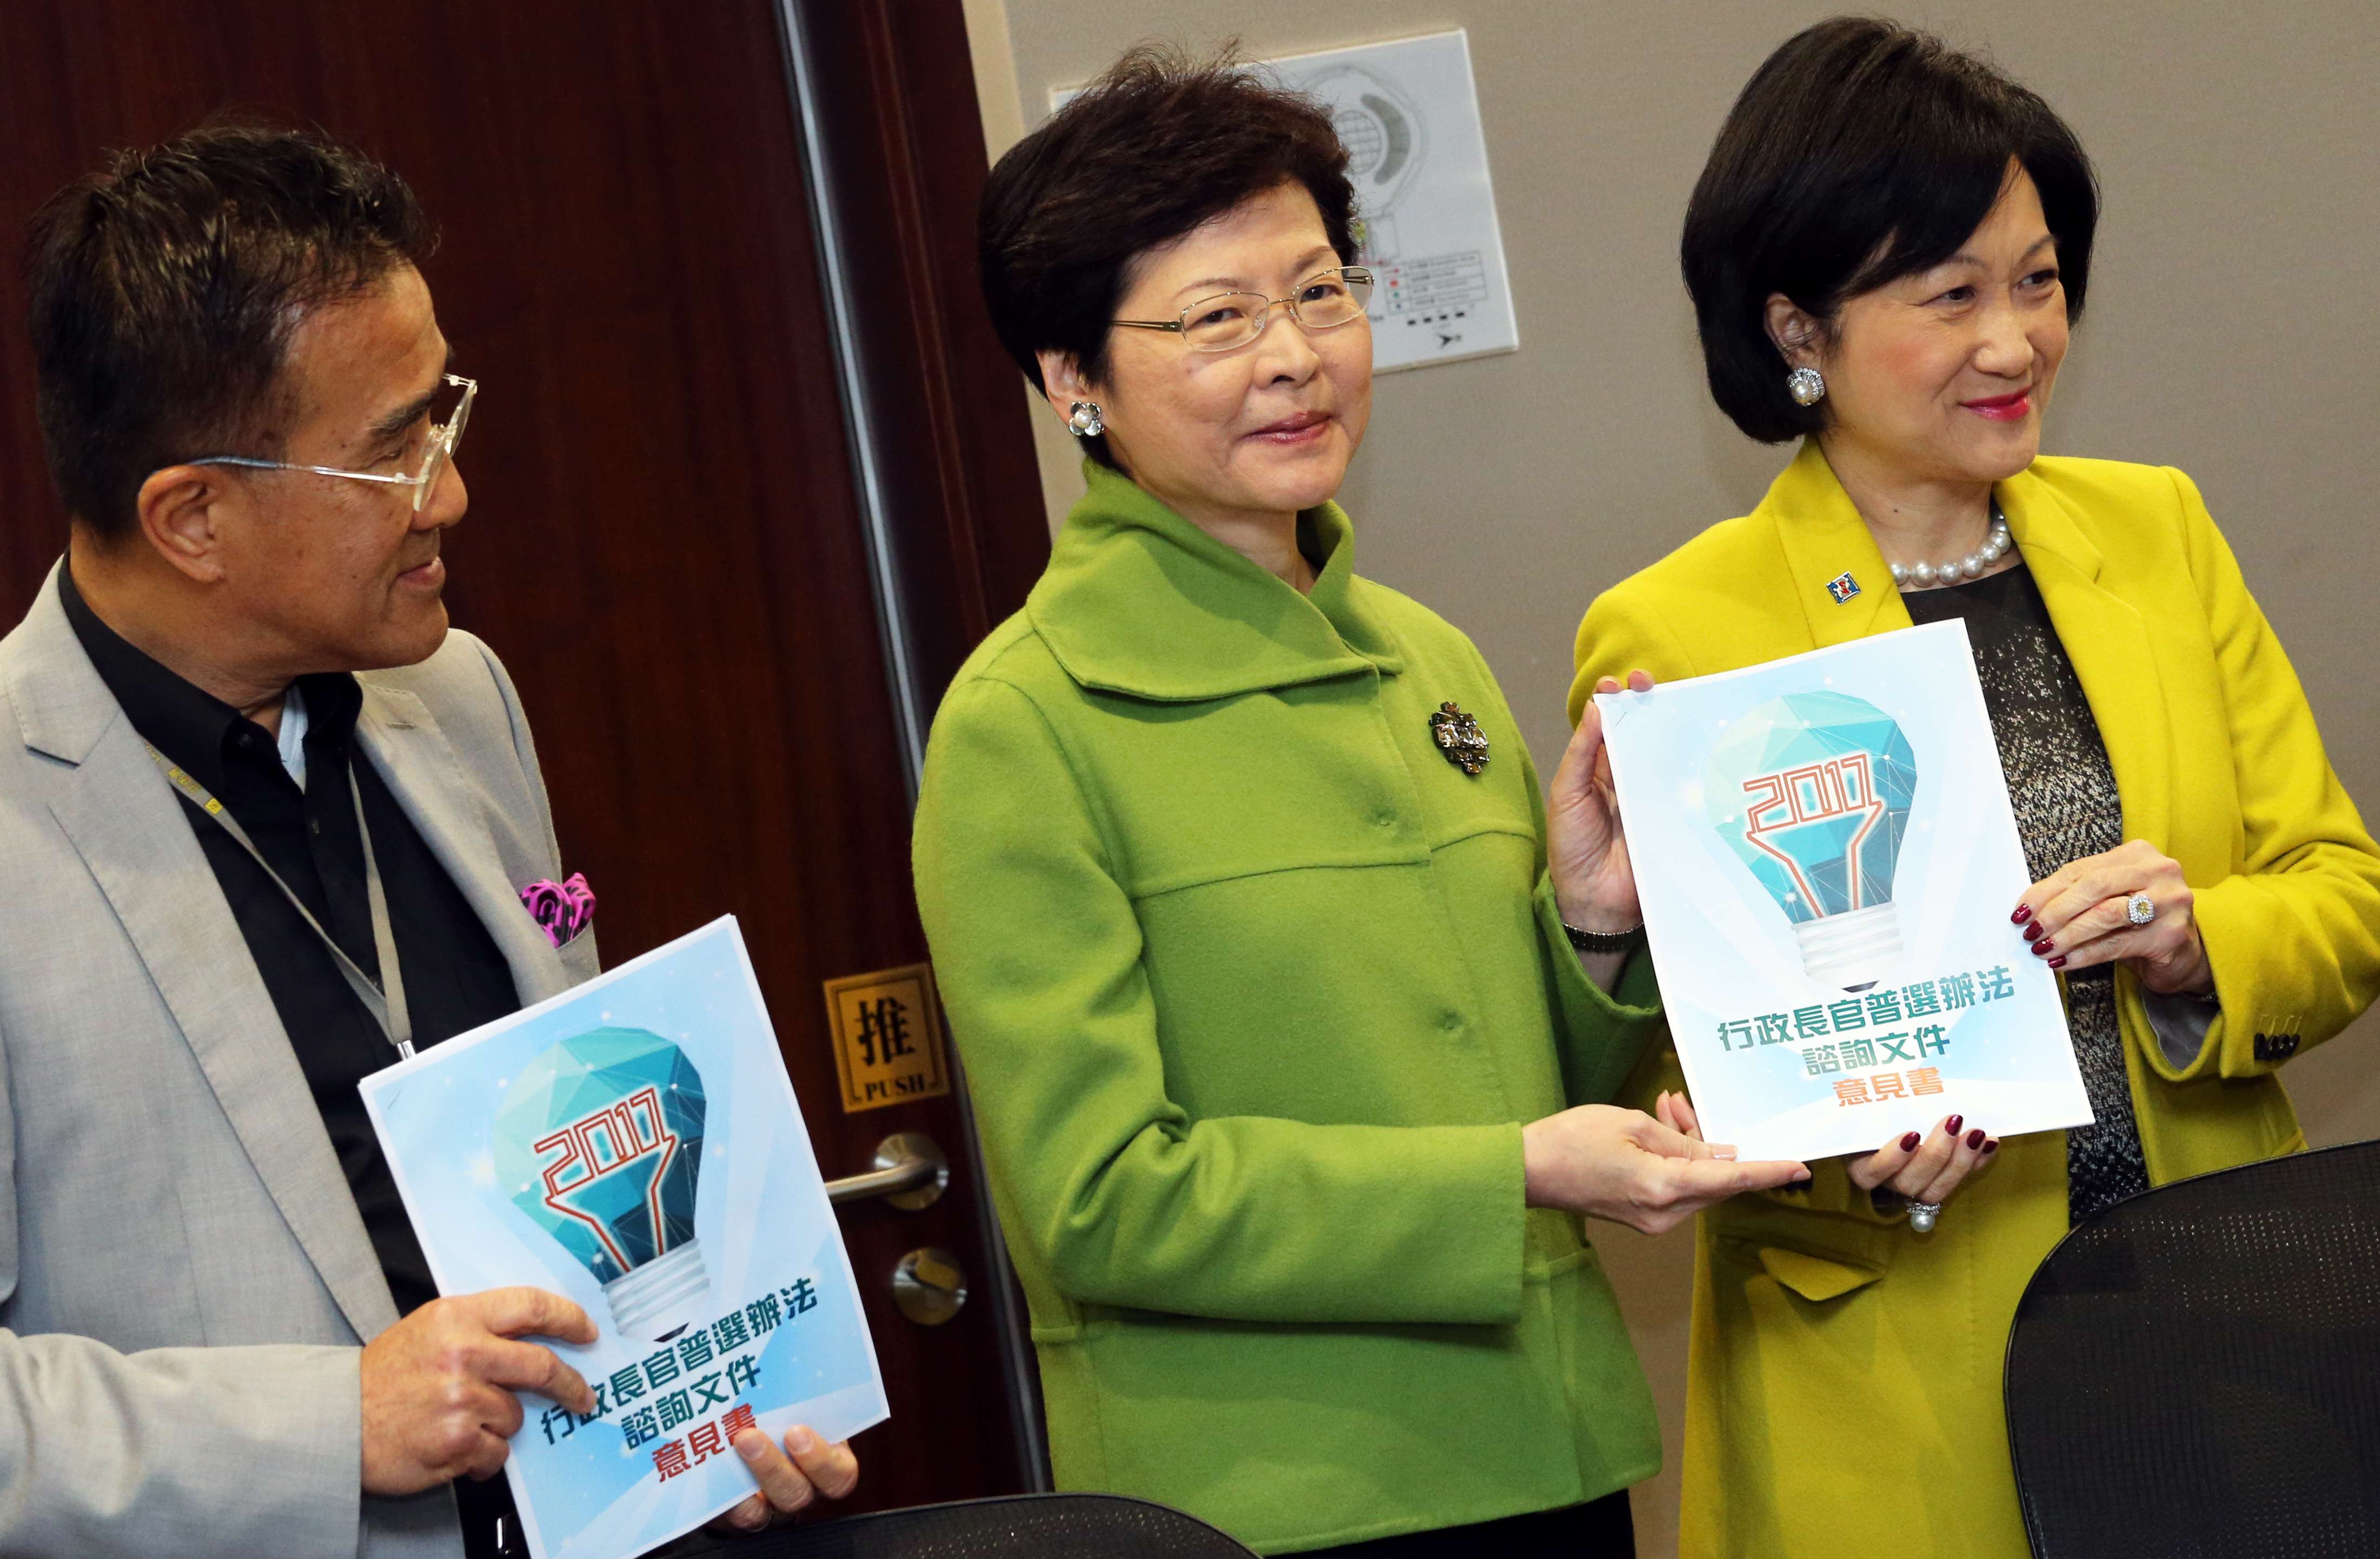 Carrie Lam (left) and Regina Ip have both been targets of online scorn after they indicated they may run for the post of Hong Kong chief executive. Photo: David Wong